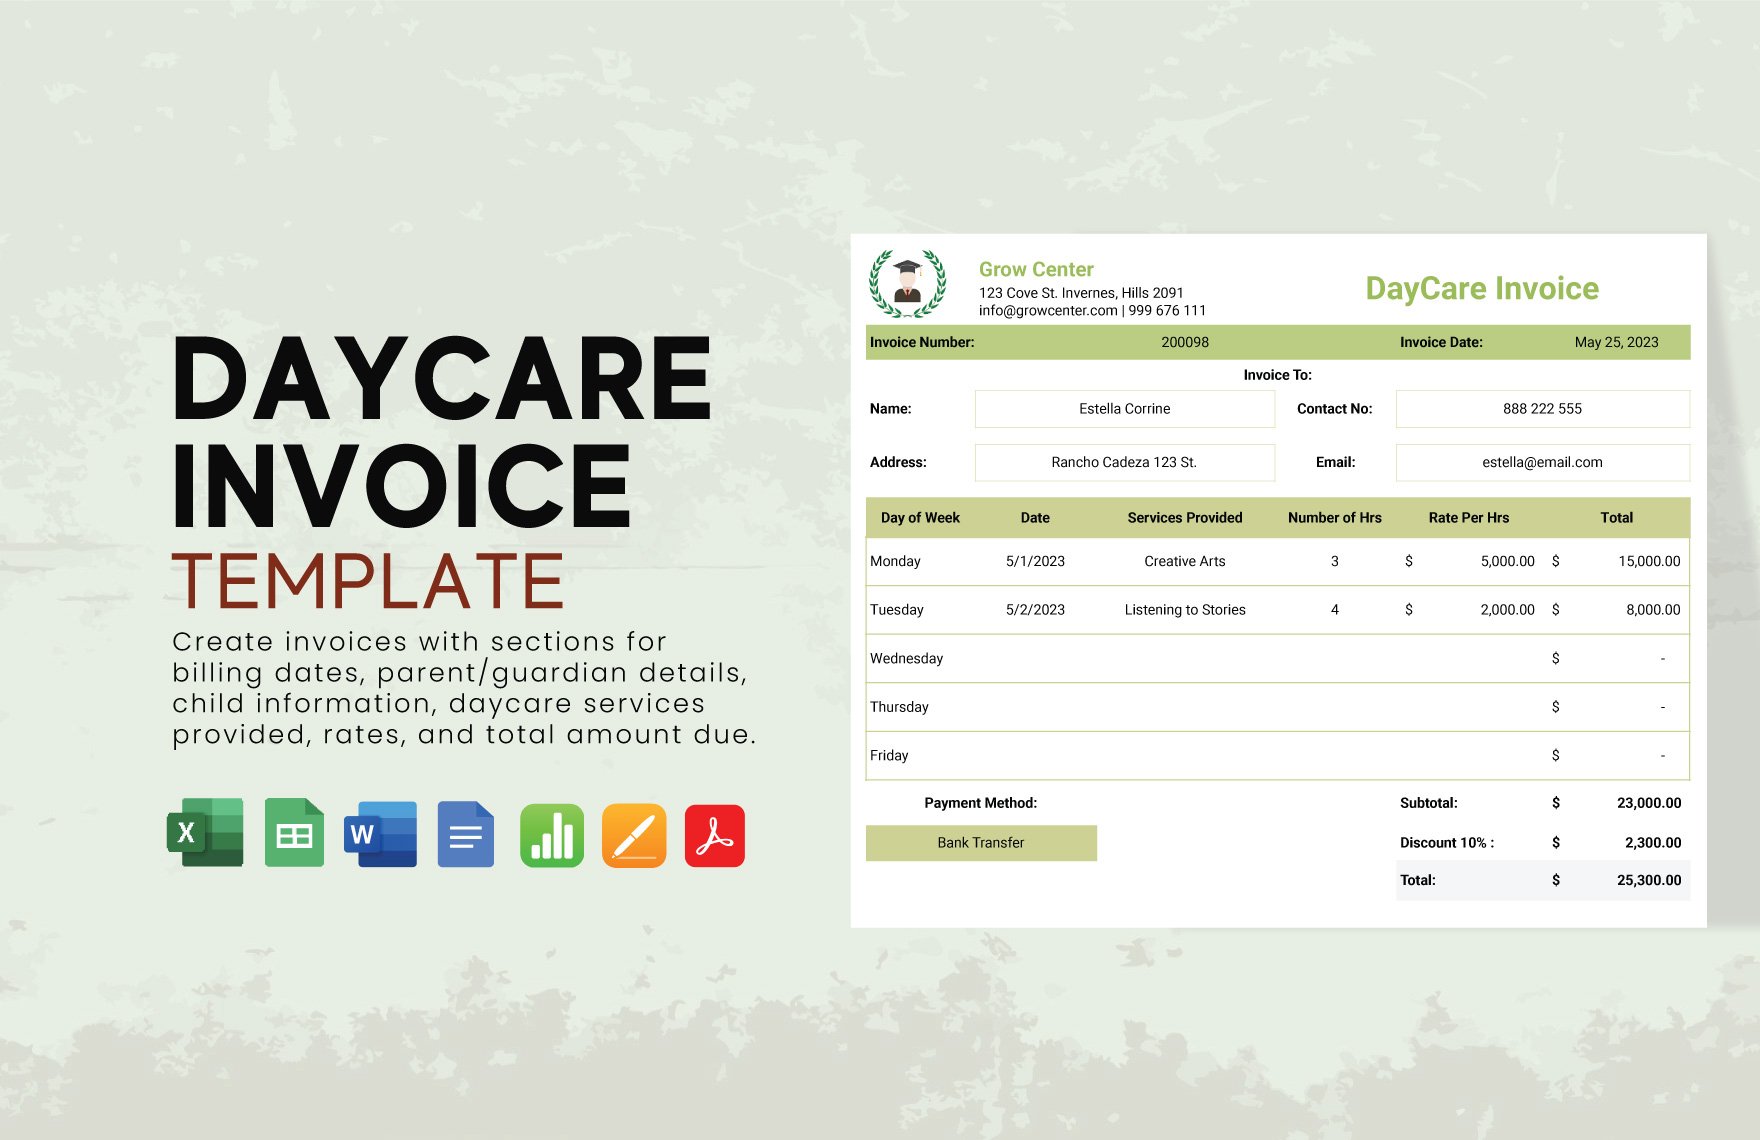 Daycare Invoice Template in Word, Google Docs, Excel, PDF, Google Sheets, Apple Pages, Apple Numbers